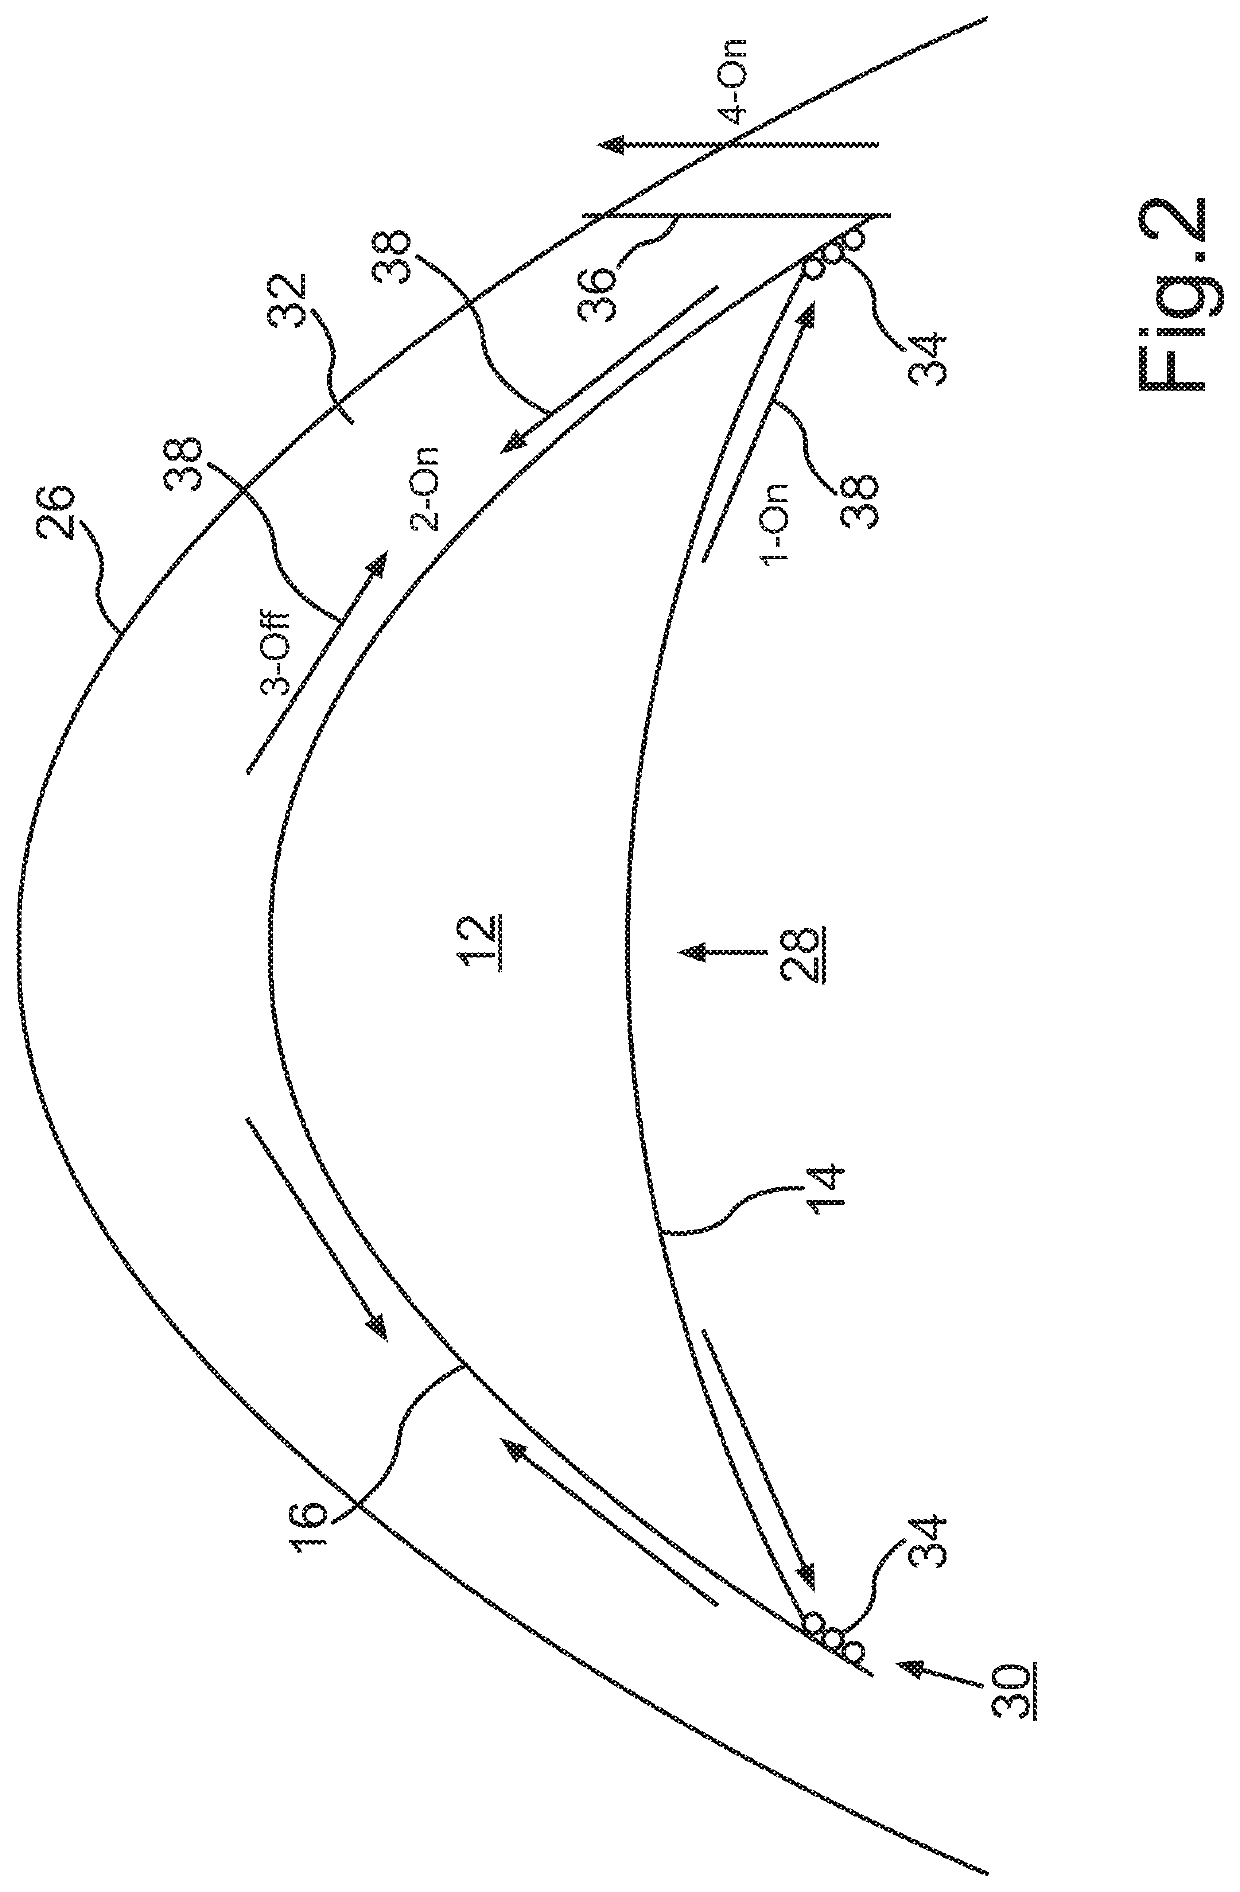 Method for controlling an eye surgical laser and treatment device